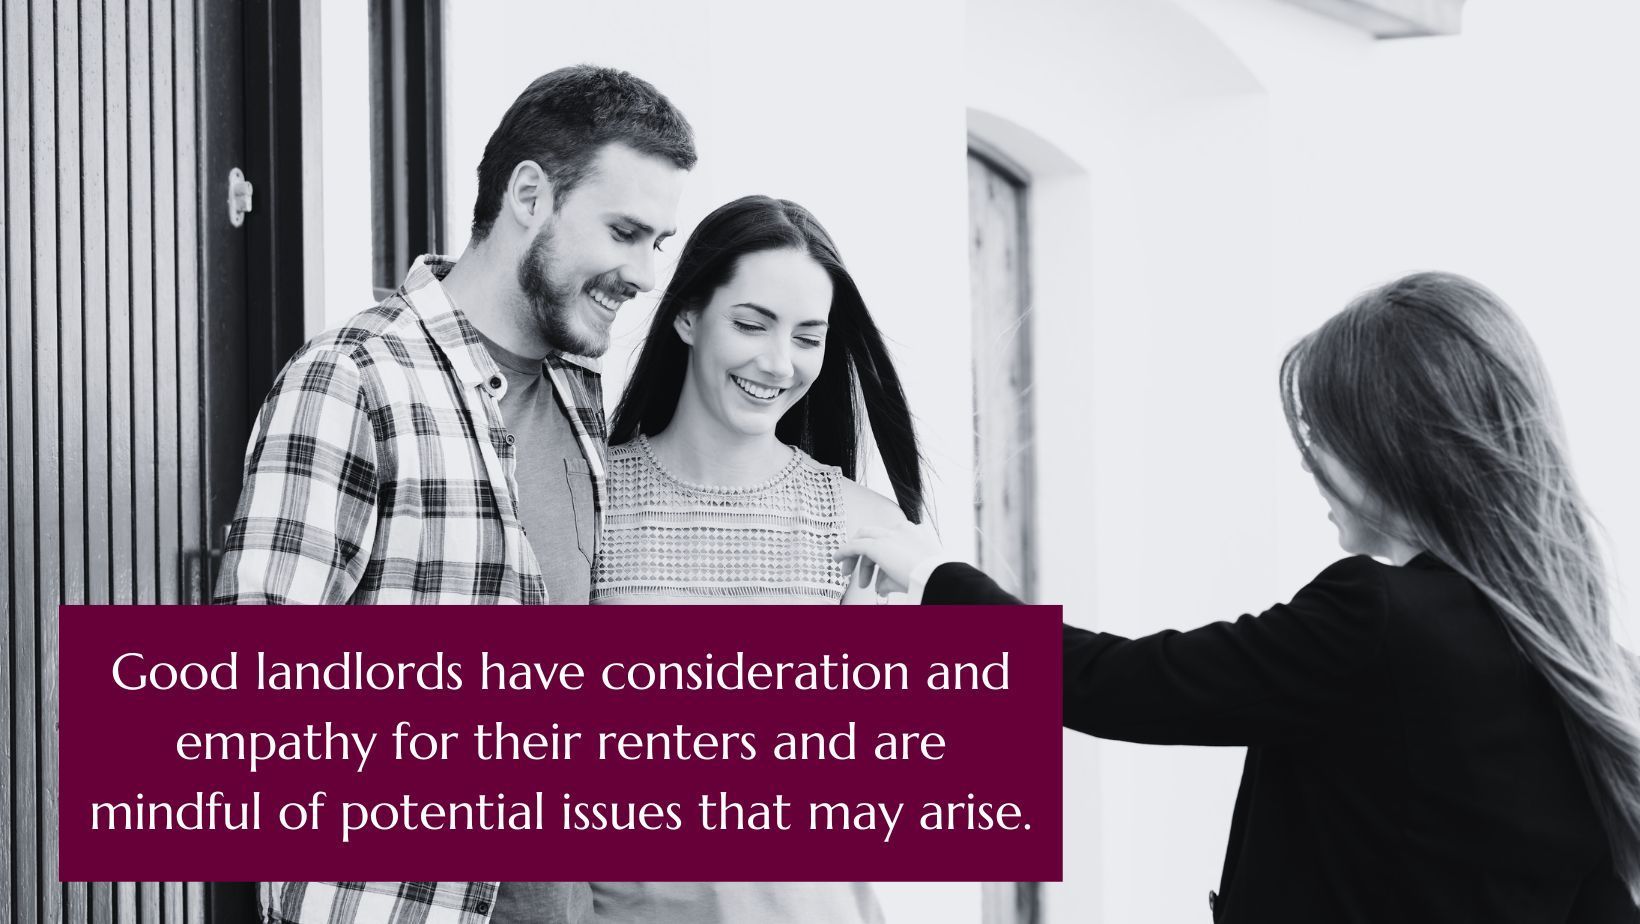 Good landlords have consideration and empathy for their renters and are mindful of potential issues that may arise.